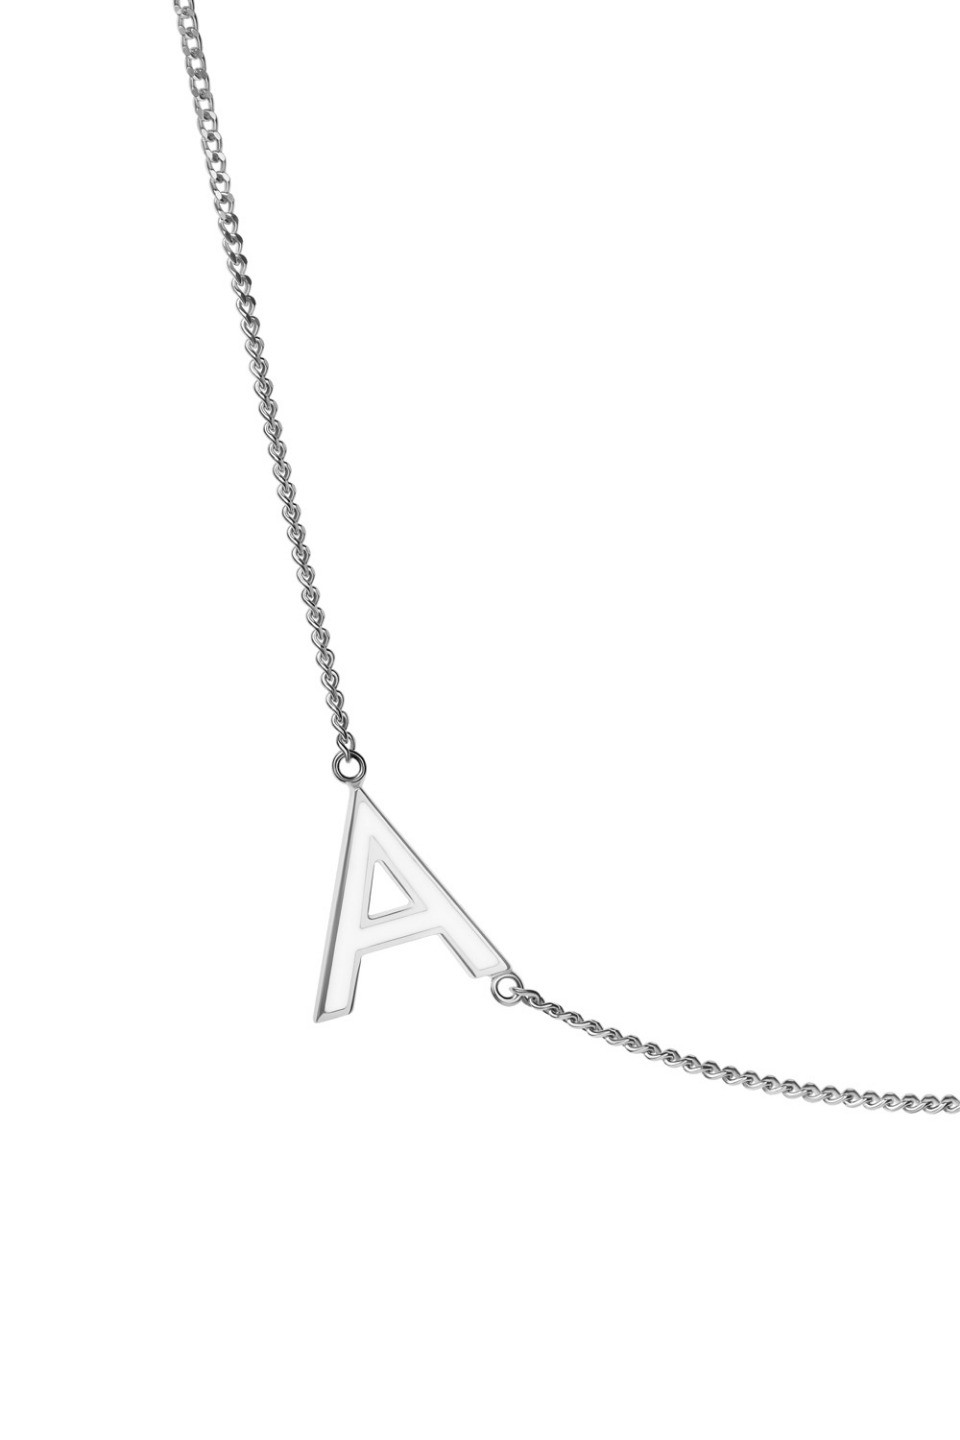 LETTER A NECKLACE WITH WHITE ENAMEL  